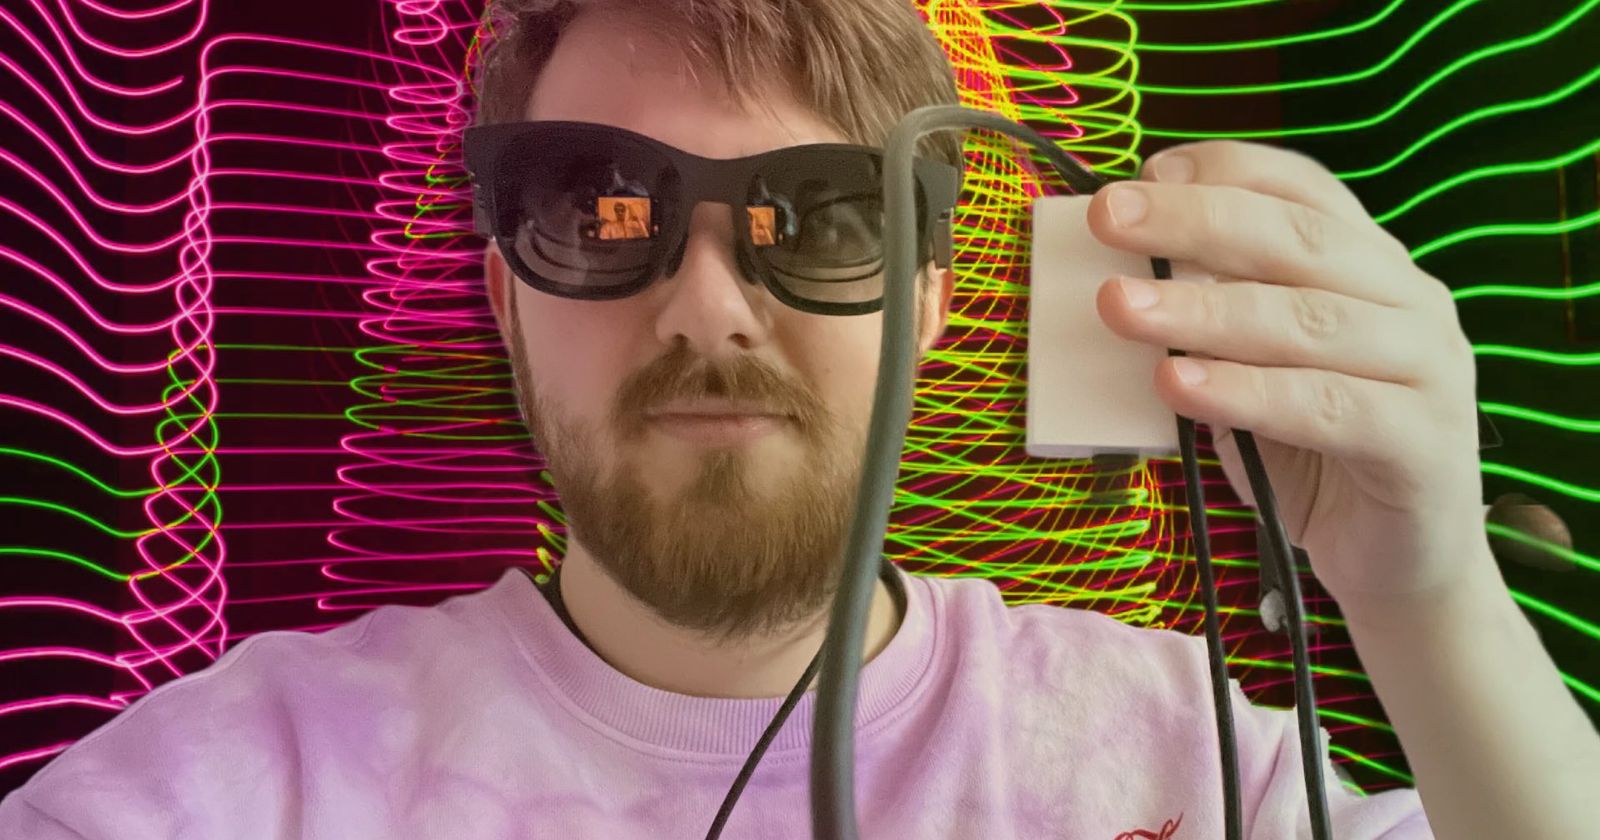 I was just watching a video of the Nreal Air(AR glasses) that let